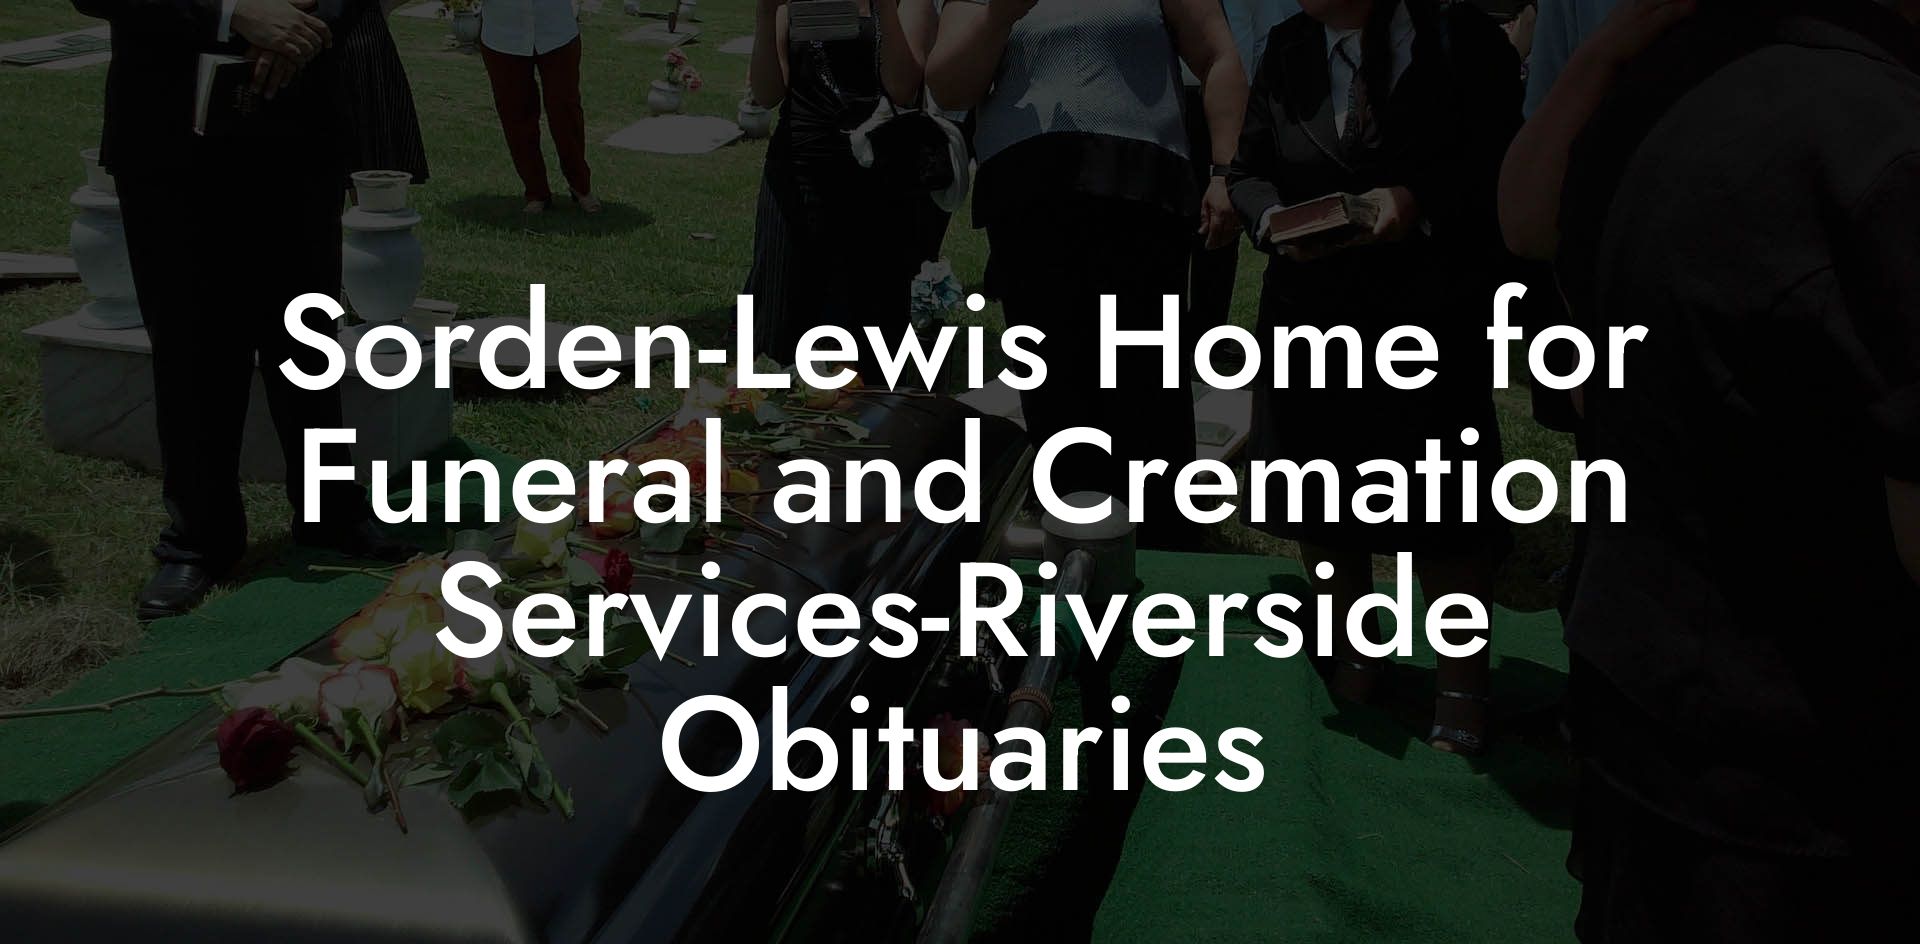 Sorden-Lewis Home for Funeral and Cremation Services-Riverside Obituaries